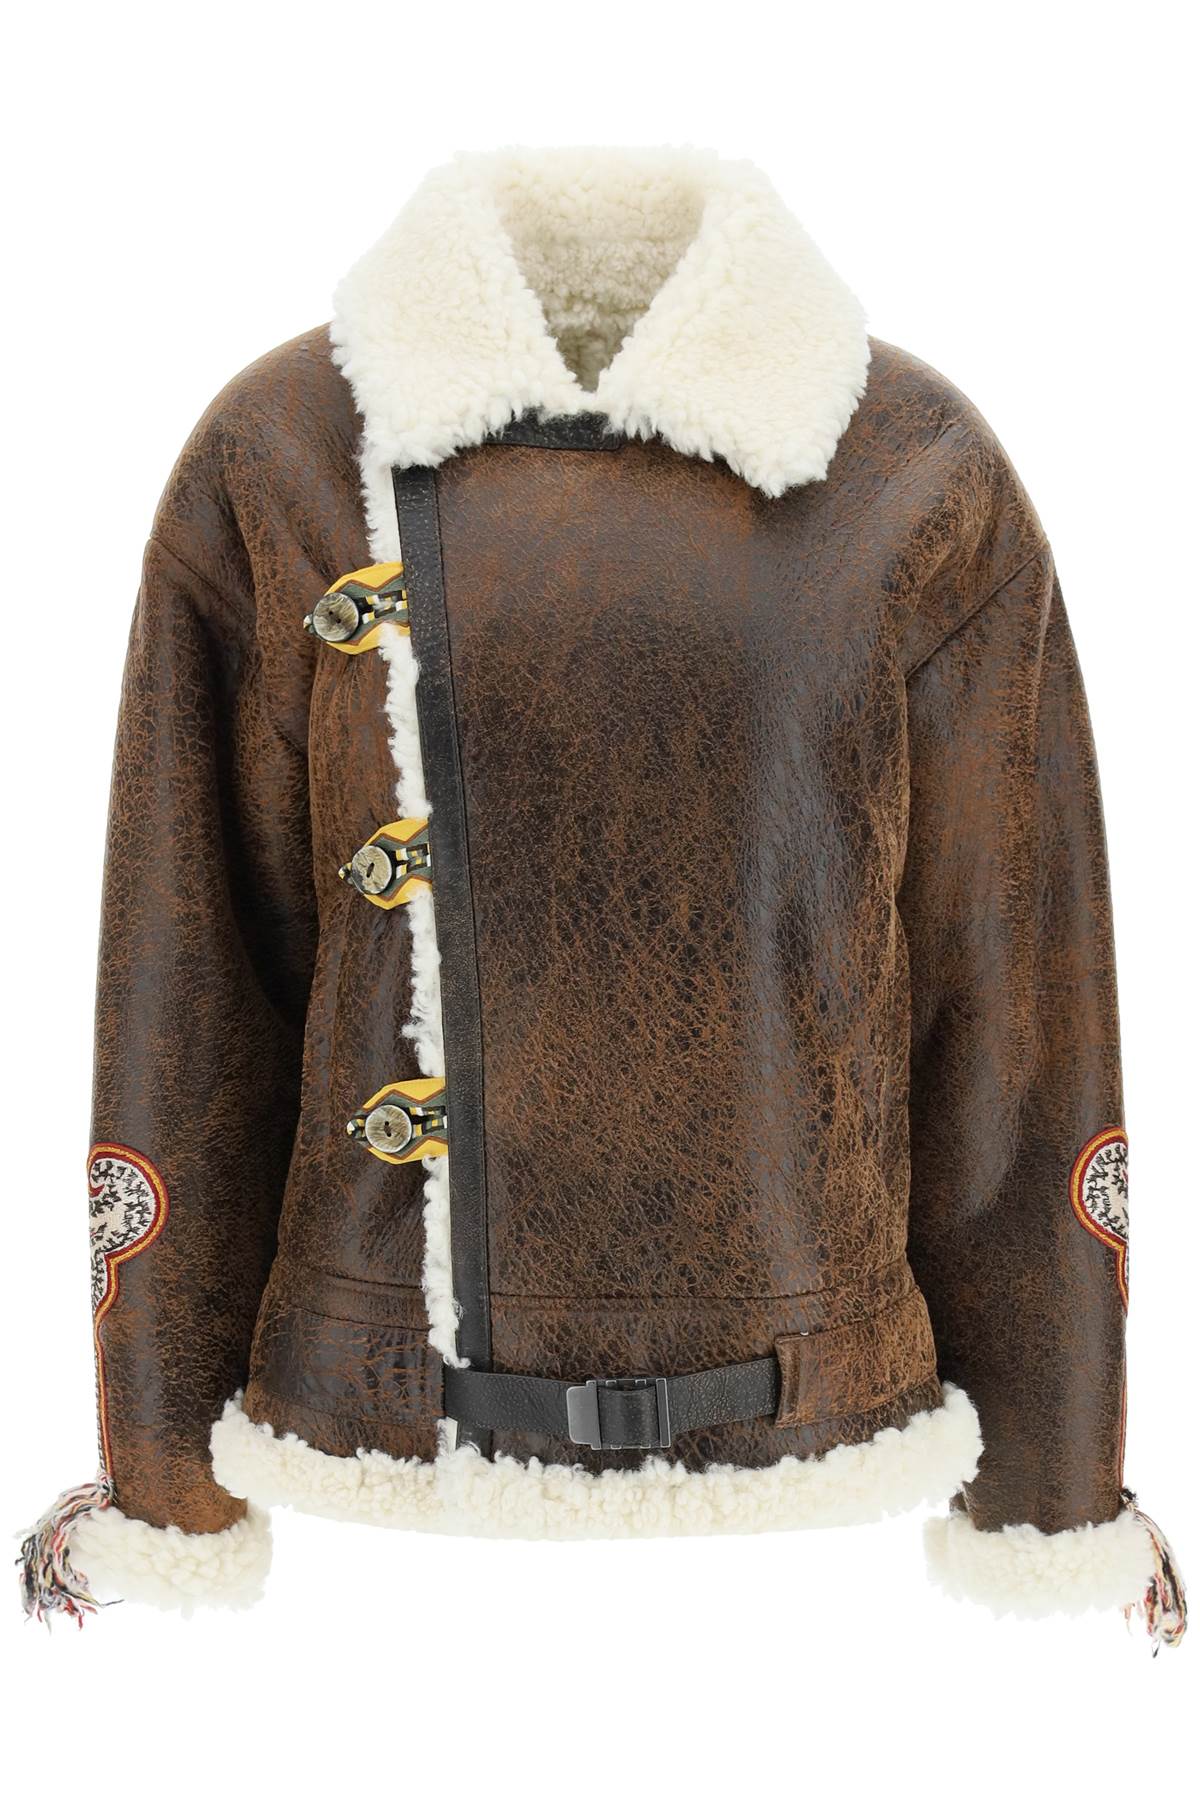 ETRO SHEARLING JACKET WITH ETHNIC EMBROIDERY